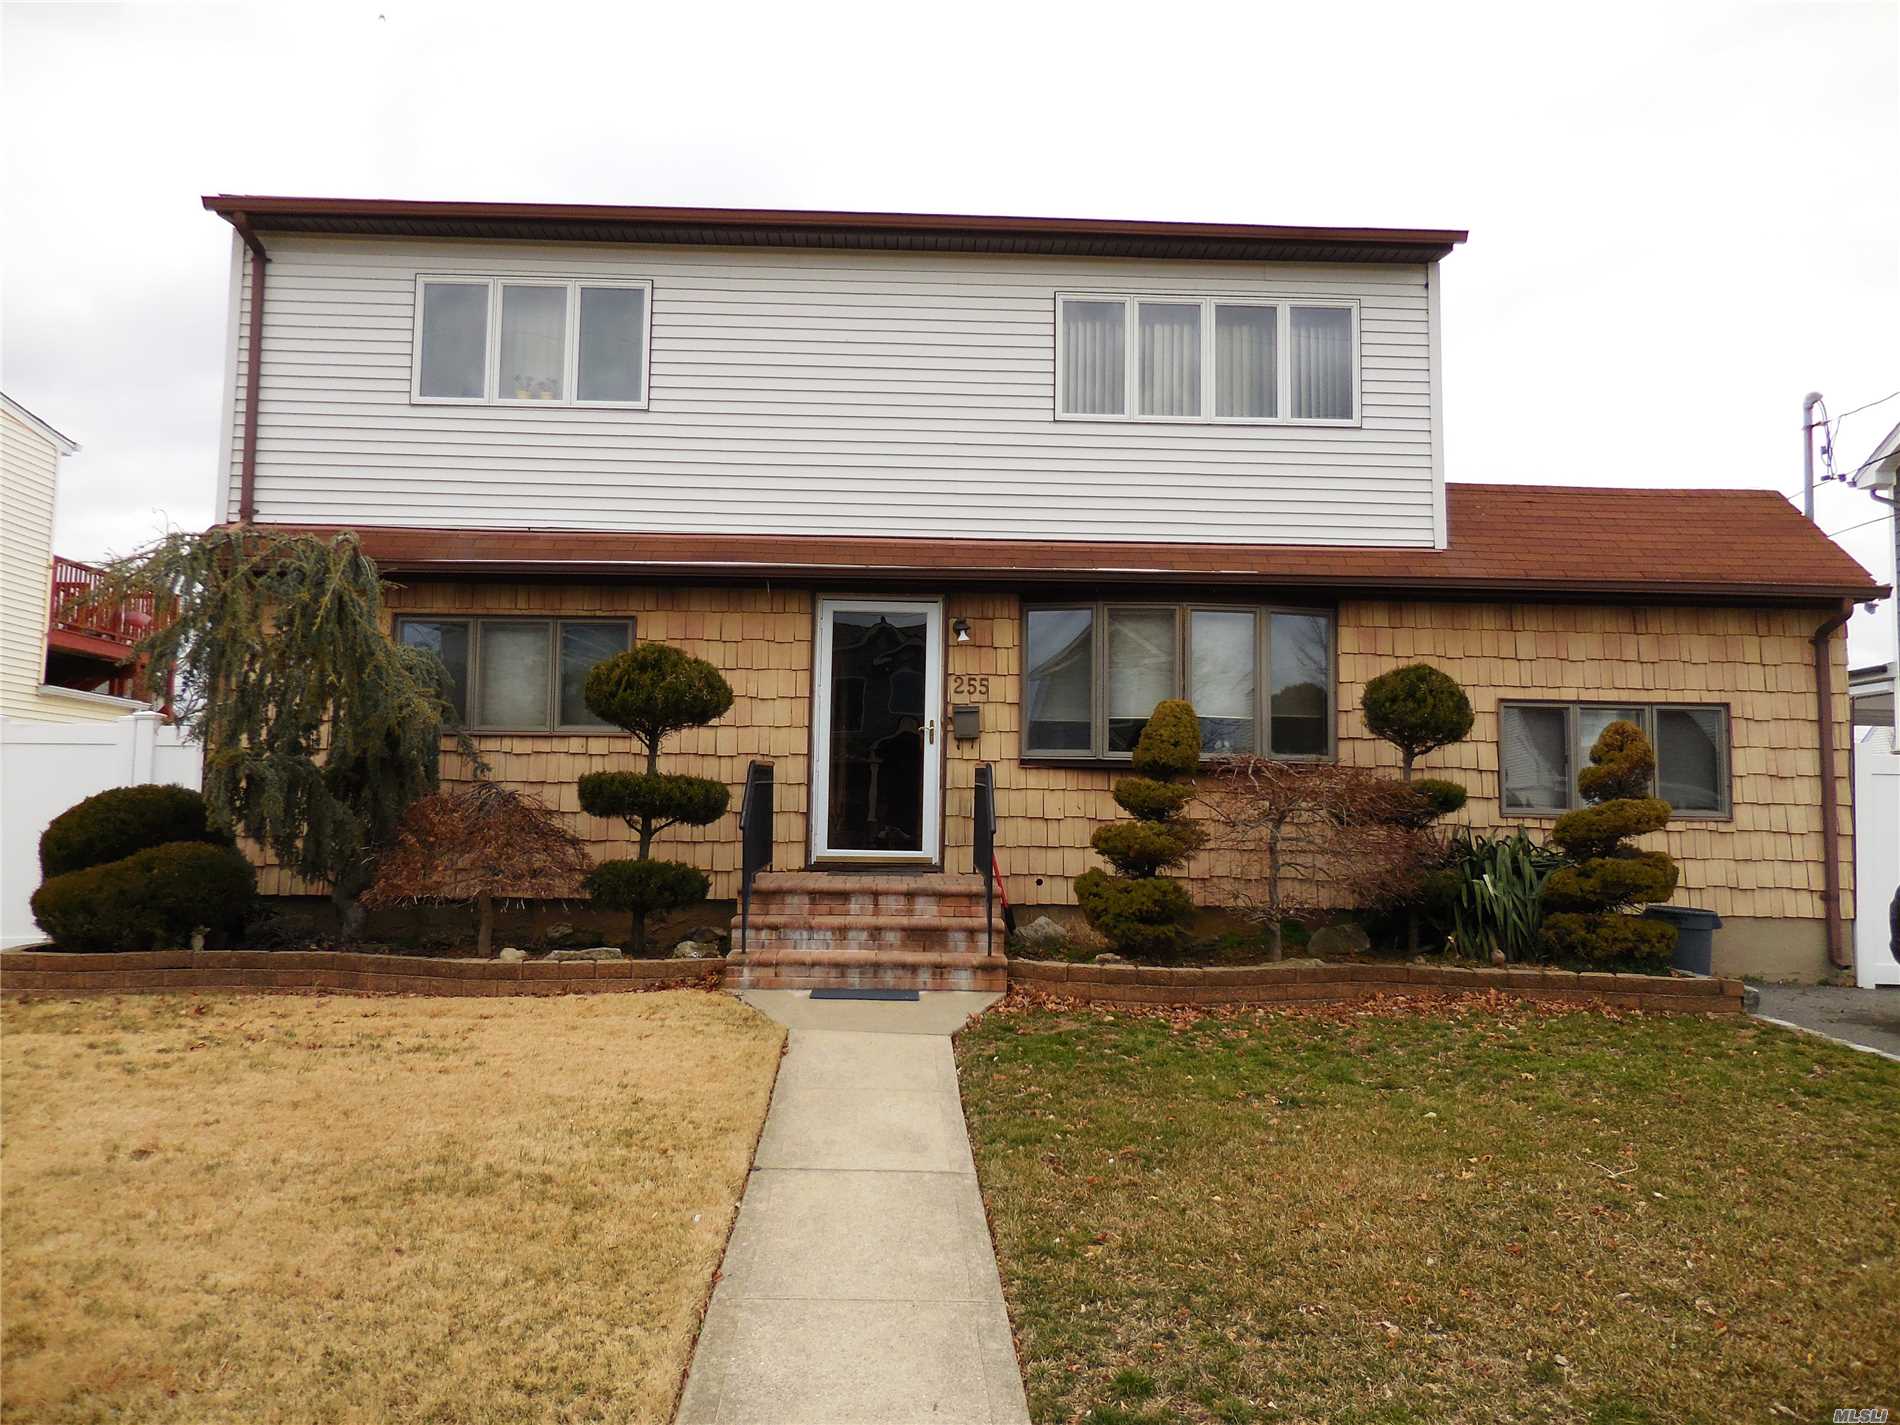 Mother Daughter With Proper Permits. Large Double Dormered Cape In Plainedge School District.  Gas Line Inside Of Home. Full Finished Basement With Outside Entrance. Updated Kitchens And Bathrooms. Entertainers Yard.